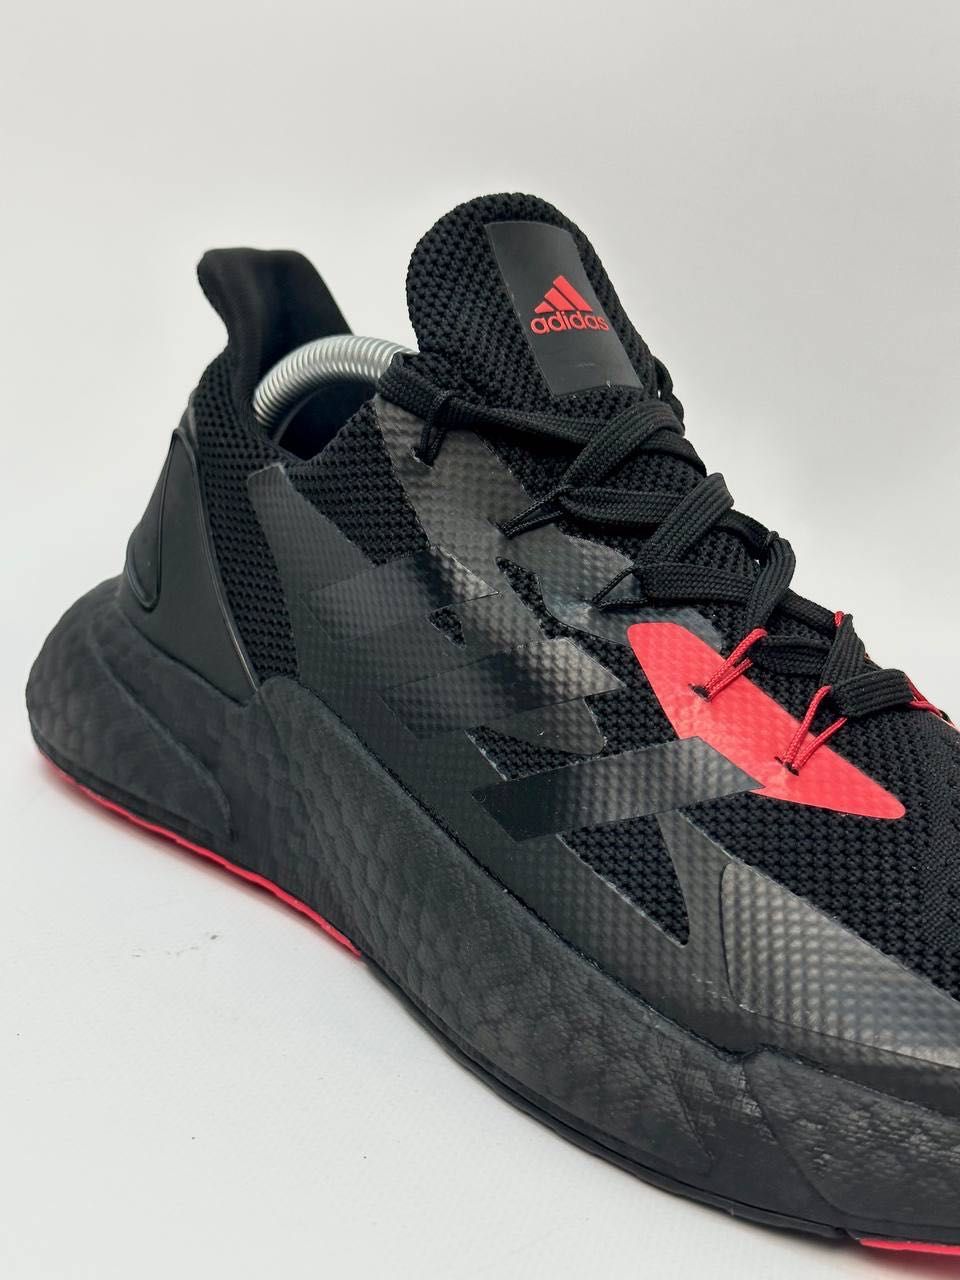 Кросівки Adidas X9000 L3 CORE black/red made in Vietnam